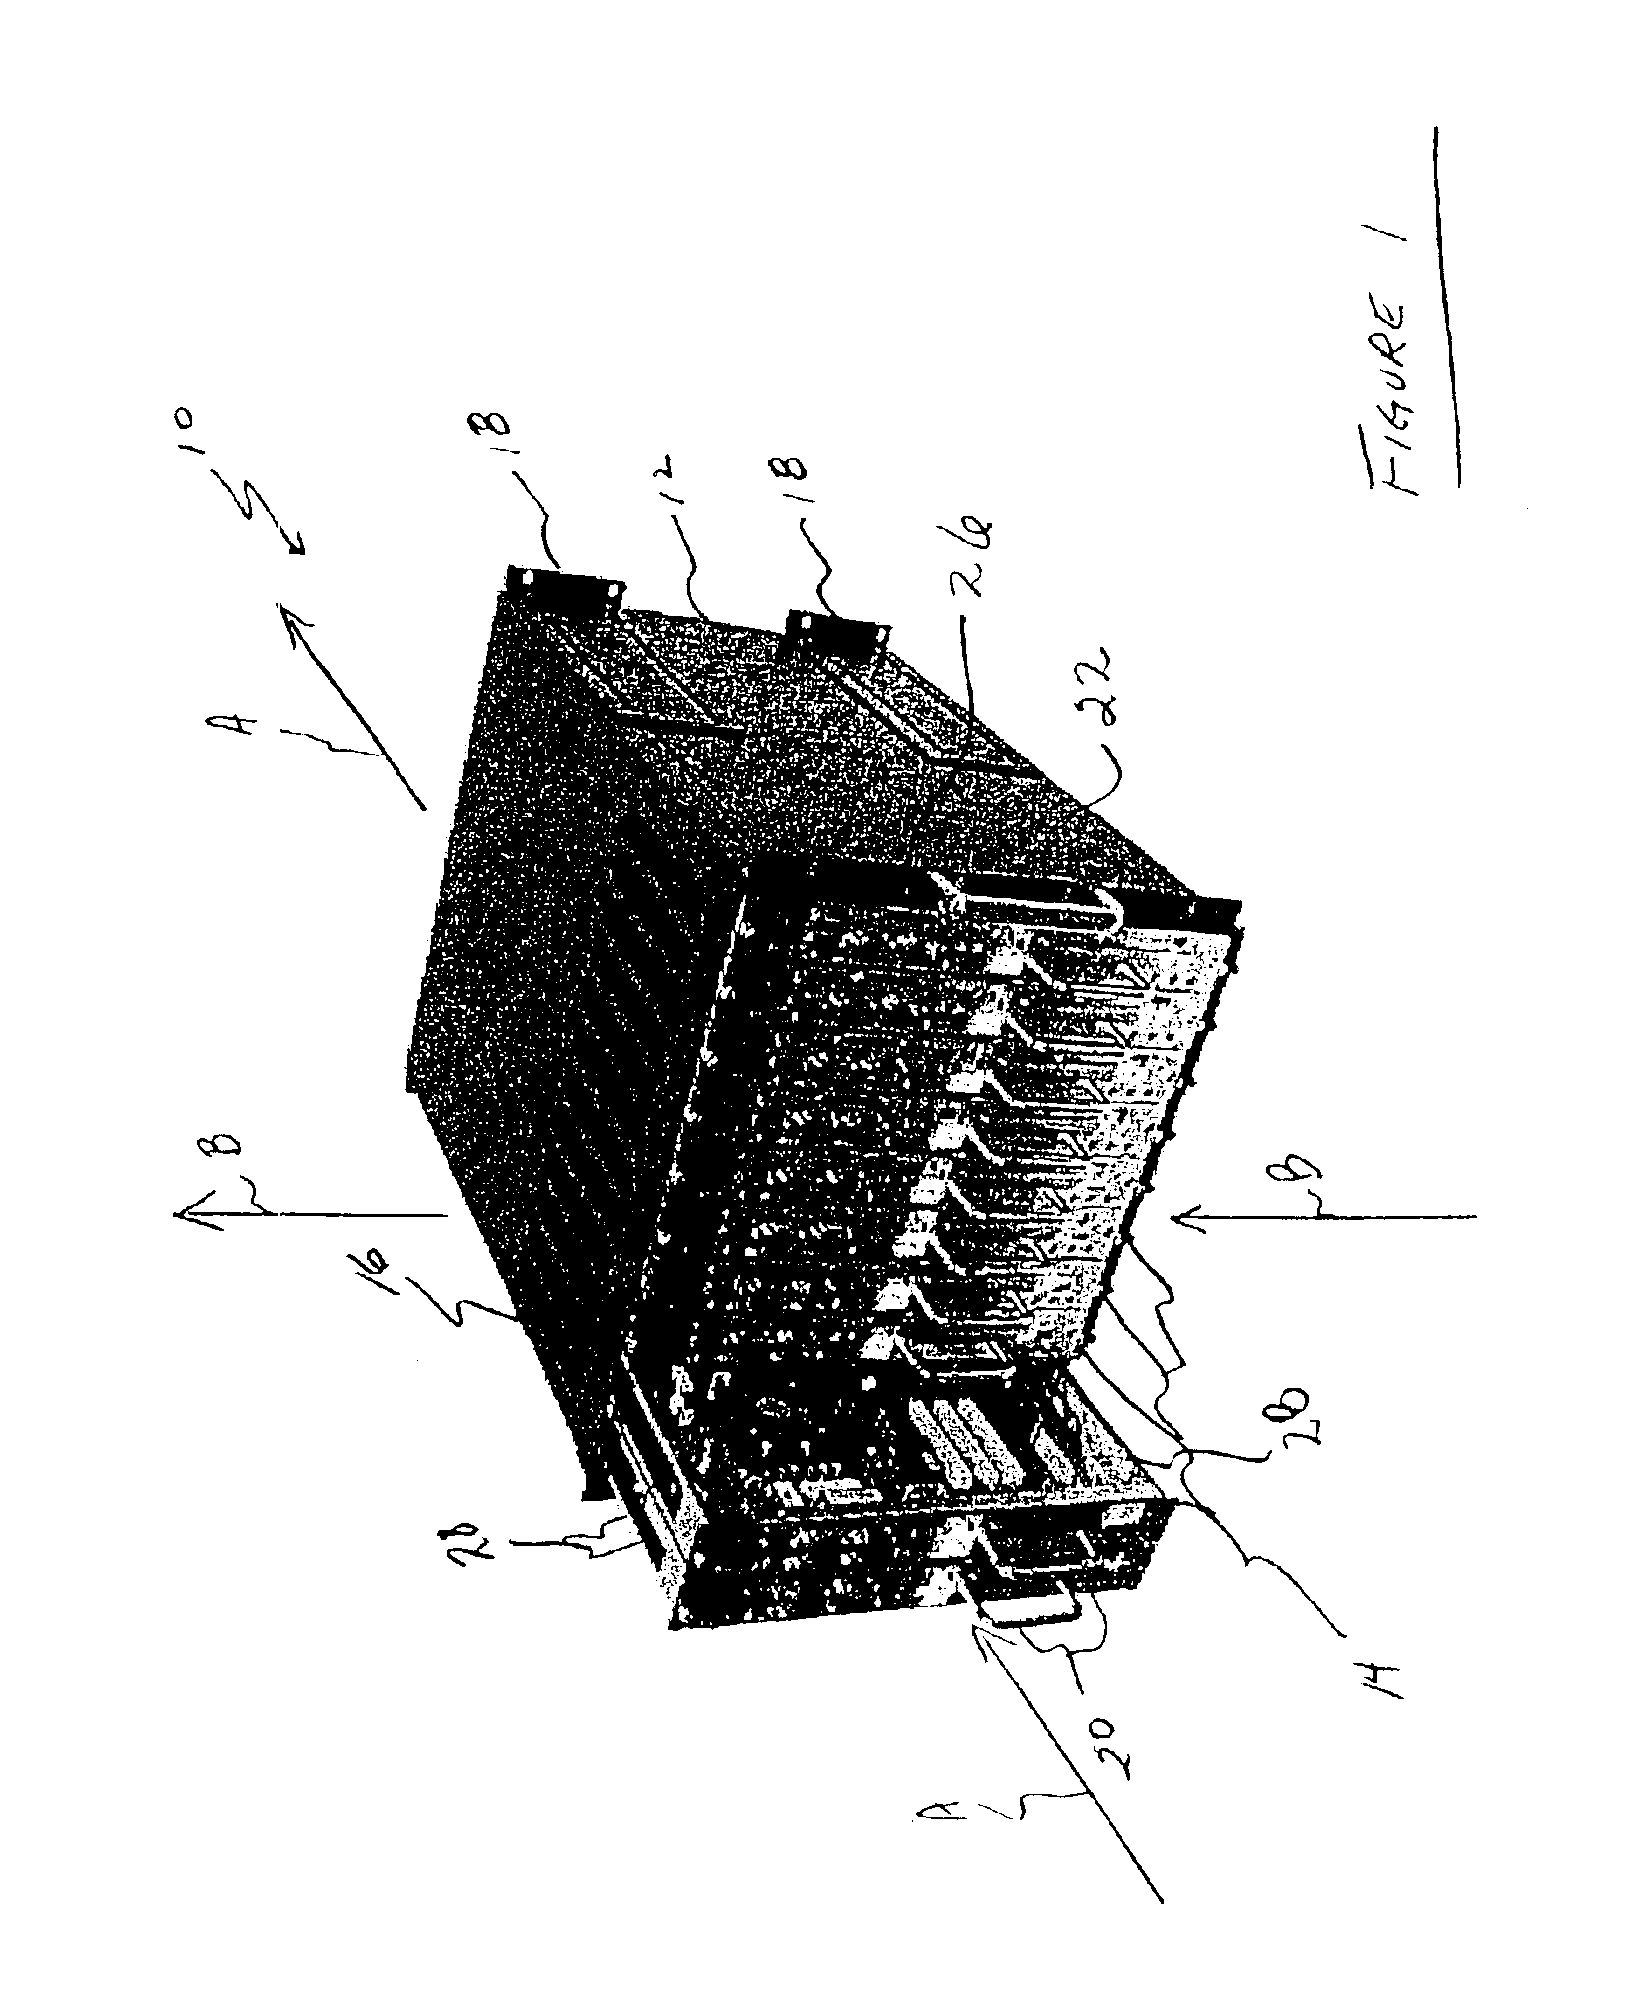 Method and apparatus for cooling a modular computer system with dual path airflow